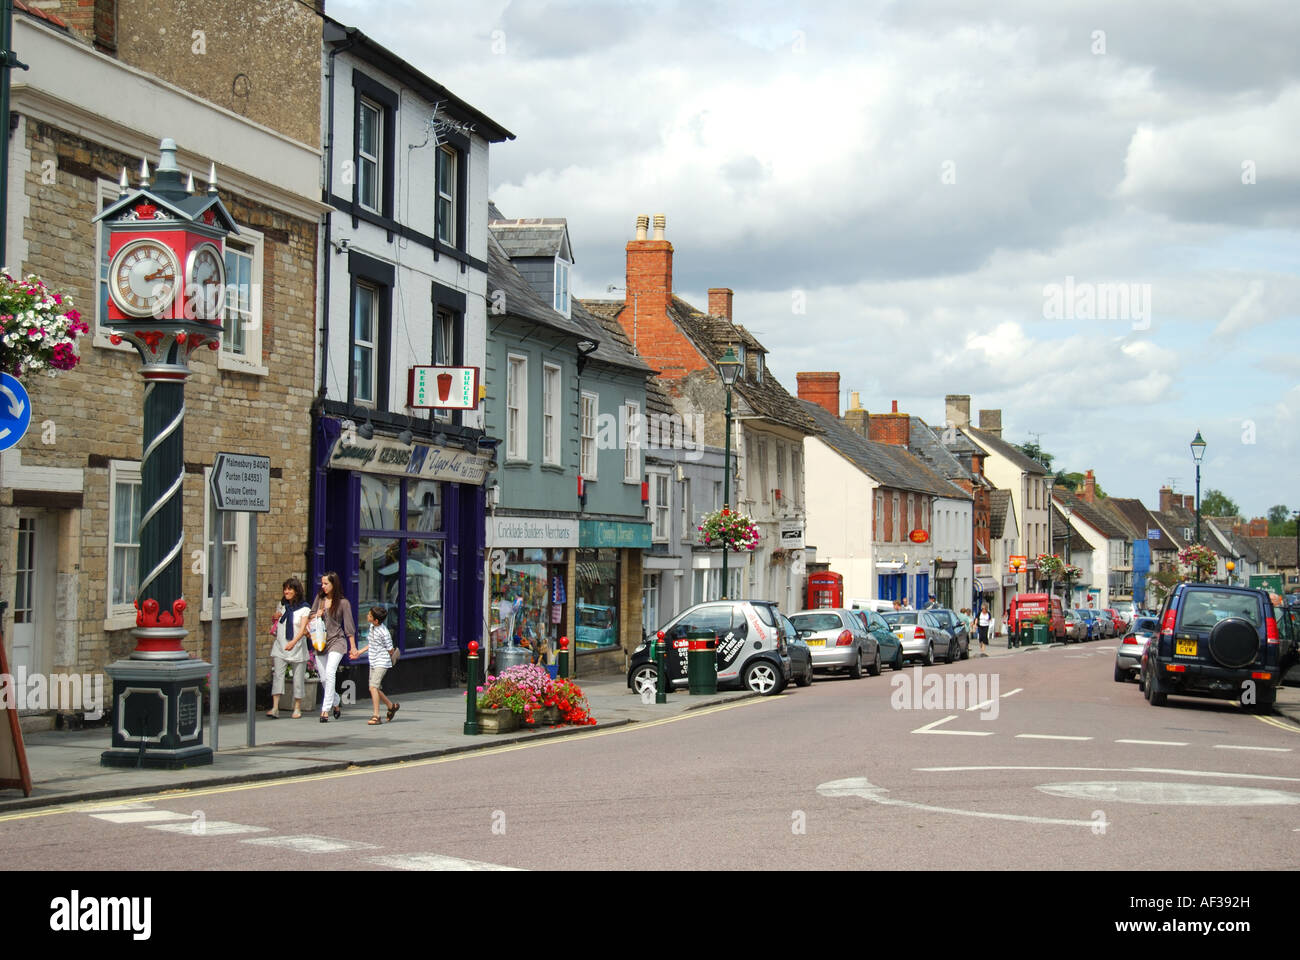 View of High Street, Cricklade, Wiltshire, England, United Kingdom Stock Photo